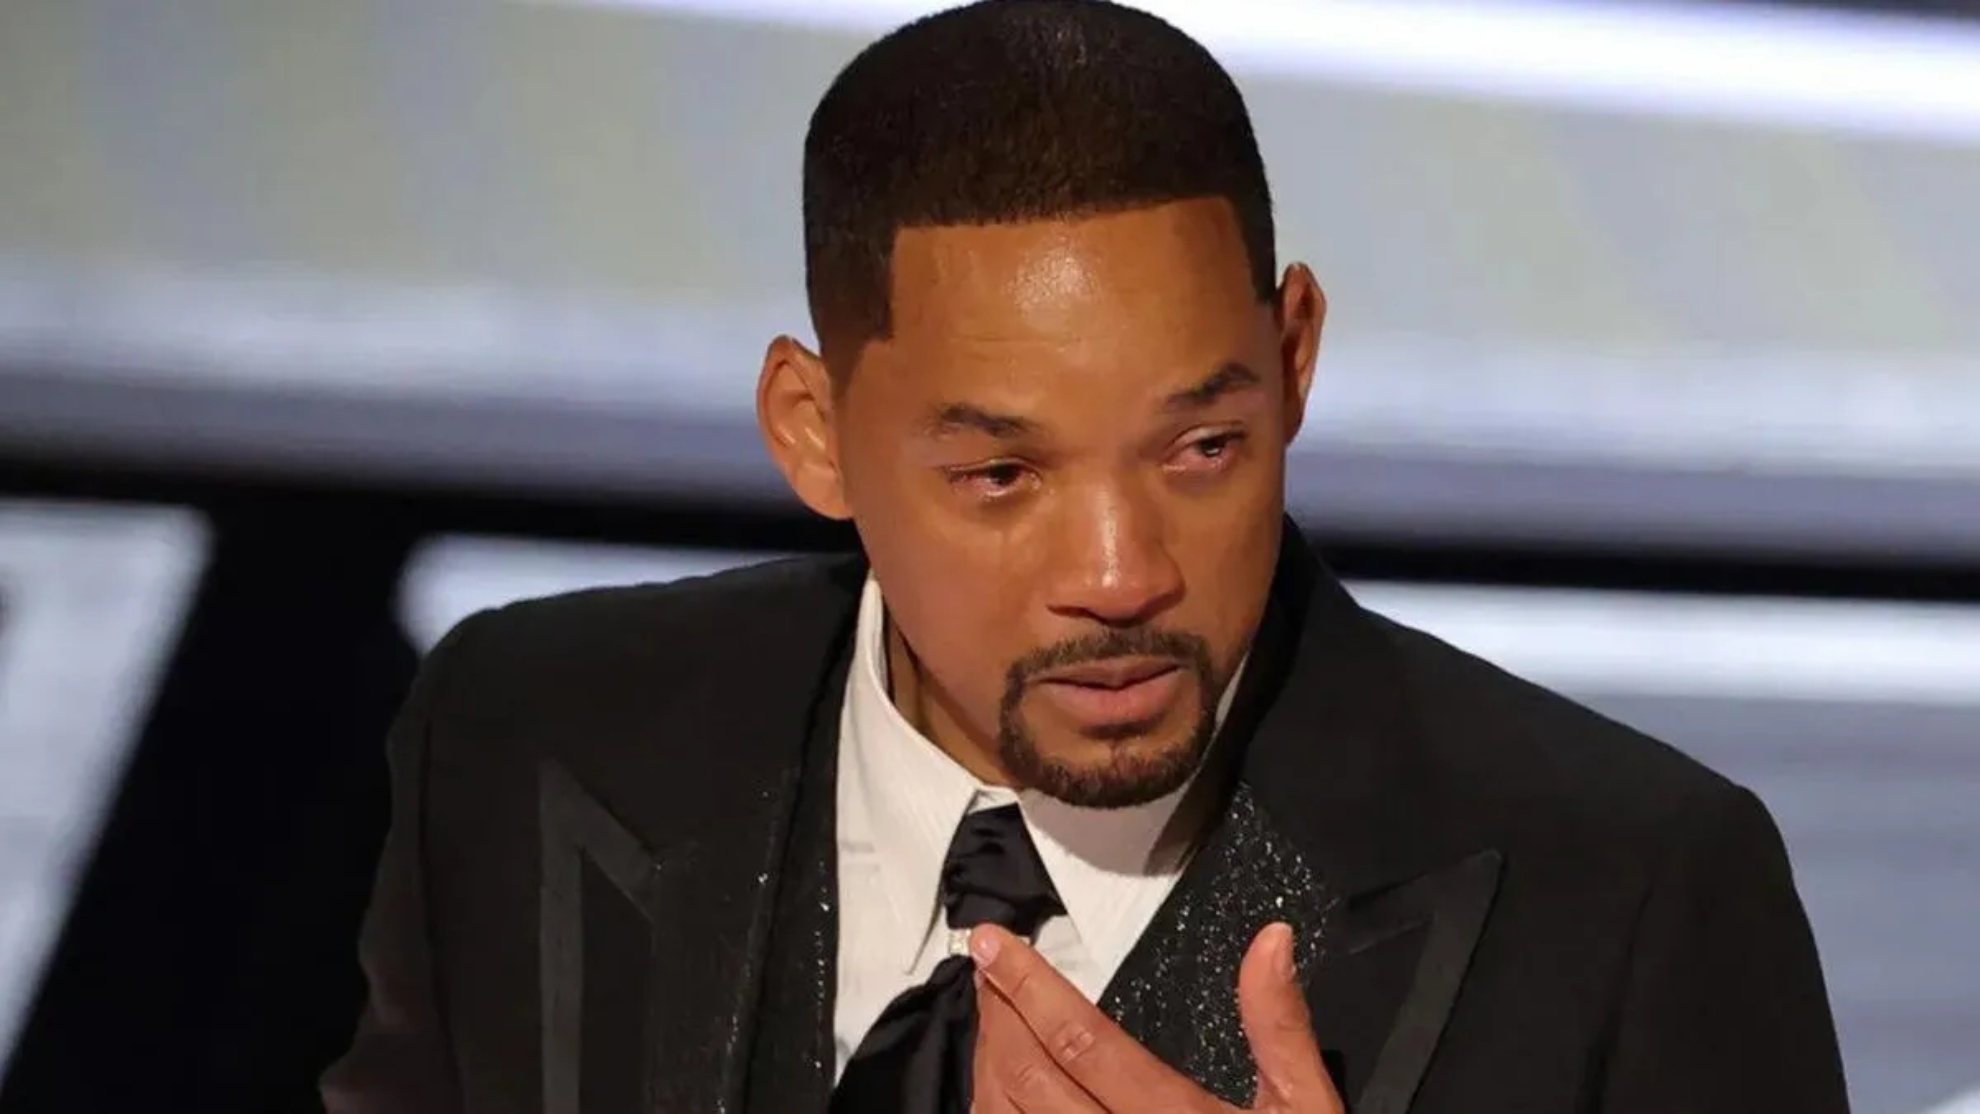 What Will Smith has lost since slapping Chris Rock at the Oscars